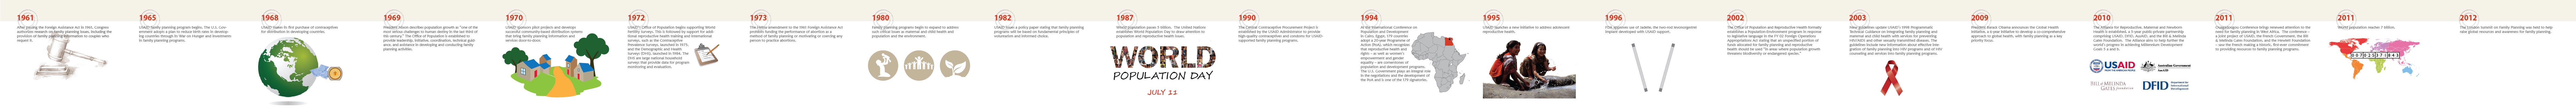 <br /><br />
        1961: After passing the Foreign Assistance Act in 1961, Congress authorizes research on family planning issues, including the provision of family planning information to couples who request it. </p>
<p>        1965: USAID family planning program begins. The U.S. Government adopts a plan to reduce birth rates in developing countries through its War on Hunger and investments in family planning programs.</p>
<p>        1968: USAID makes its first purchase of contraceptives for distribution in developing countries.</p>
<p>        1969: President Nixon describes population growth as “one of the most serious challenges to human destiny in the last third of this century.” The Office of Population is established to provide leadership, initiative, coordination, technical guidance, and assistance in developing and conducting family planning activities.</p>
<p>        1970s: USAID sponsors pilot projects and develops successful community-based distribution systems that bring family planning information and services door-to-door.</p>
<p>        1972: USAID’s Office of Population begins supporting World Fertility Surveys. This is followed by support for additional reproductive health training and international surveys, such as the Contraceptive Prevalence Surveys, launched in 1975, and the Demographic and Health Surveys (DHS), launched in 1984. The DHS are large national household surveys that provide data for program monitoring and evaluation.</p>
<p>        1973: The Helms amendment to the 1961 Foreign Assistance Act prohibits funding the performance of abortion as a method of family planning or motivating or coercing any person to practice abortions.</p>
<p>        1980s: Family planning programs expand to address such critical issues as maternal and child health and population and the environment.</p>
<p>        1982: USAID issues a policy paper stating that family planning programs will be based on fundamental principles of voluntarism and informed choice.</p>
<p>        1987: World population passes 5 billion.  The United Nations establishes World Population Day to draw attention to population and reproductive health issues.</p>
<p>        1990: The Central Contraceptive Procurement Project is established by the USAID Administrator to provide high-quality contraceptives and condoms for USAID-supported family planning programs. </p>
<p>        1994: At the International Conference on Population and Development in Cairo, Egypt, 179 countries adopt a 20-year Programme of Action (PoA), which recognizes that reproductive health and rights – as well as women’s empowerment and gender equality – are cornerstones of population and development programs. The U.S. Government plays an integral role in the negotiations and the development of the PoA and is one of the 179 signatories.</p>
<p>        1995: USAID launches a new initiative to address adolescent reproductive health. </p>
<p>        1996: FDA approves use of Jadelle, the two-rod levonorgestrel implant developed with USAID support.</p>
<p>        2002: The Office of Population and Reproductive Health formally establishes a Population-Environment program in response to legislative language in the FY 02 Foreign Operations Appropriations Act stating that an unspecified portion of funds allocated for family planning and reproductive health should be used “in areas where population growth threatens biodiversity or endangered species.”</p>
<p>        2003: New guidelines update USAID’s 1998 Programmatic Technical Guidance on integrating family planning and maternal and child health with services for preventing HIV/AIDS and other sexually transmitted diseases. The guidelines include new information about effective integration of family planning into HIV programs and of HIV counseling and services into family planning programs.</p>
<p>        2009: President Barack Obama announces the Global Health Initiative, a 6-year initiative to develop a co-comprehensive approach to global health, with family planning as a key priority focus.  </p>
<p>        2010: The Alliance for Reproductive, Maternal and Newborn Health is established, a 5-year public-private partnership comprising USAID, DFID, AusAID, and the Bill & Melinda Gates Foundation.  The Alliance aims to help further the world’s progress in achieving Millennium Development Goals 5 a and b.  </p>
<p>        2011: Ouagadougou Conference brings renewed attention to the need for family planning in West Africa.  The conference – a joint project of USAID, the French Government, the Bill & Melinda Gates Foundation, and the Hewlett Foundation – saw the French making a historic, first-ever commitment to providing resources to family planning programs.</p>
<p>        2011: World population reaches 7 billion.</p>
<p>        2012: The London Summit on Family Planning was held to help raise global resources and awareness for family planning.